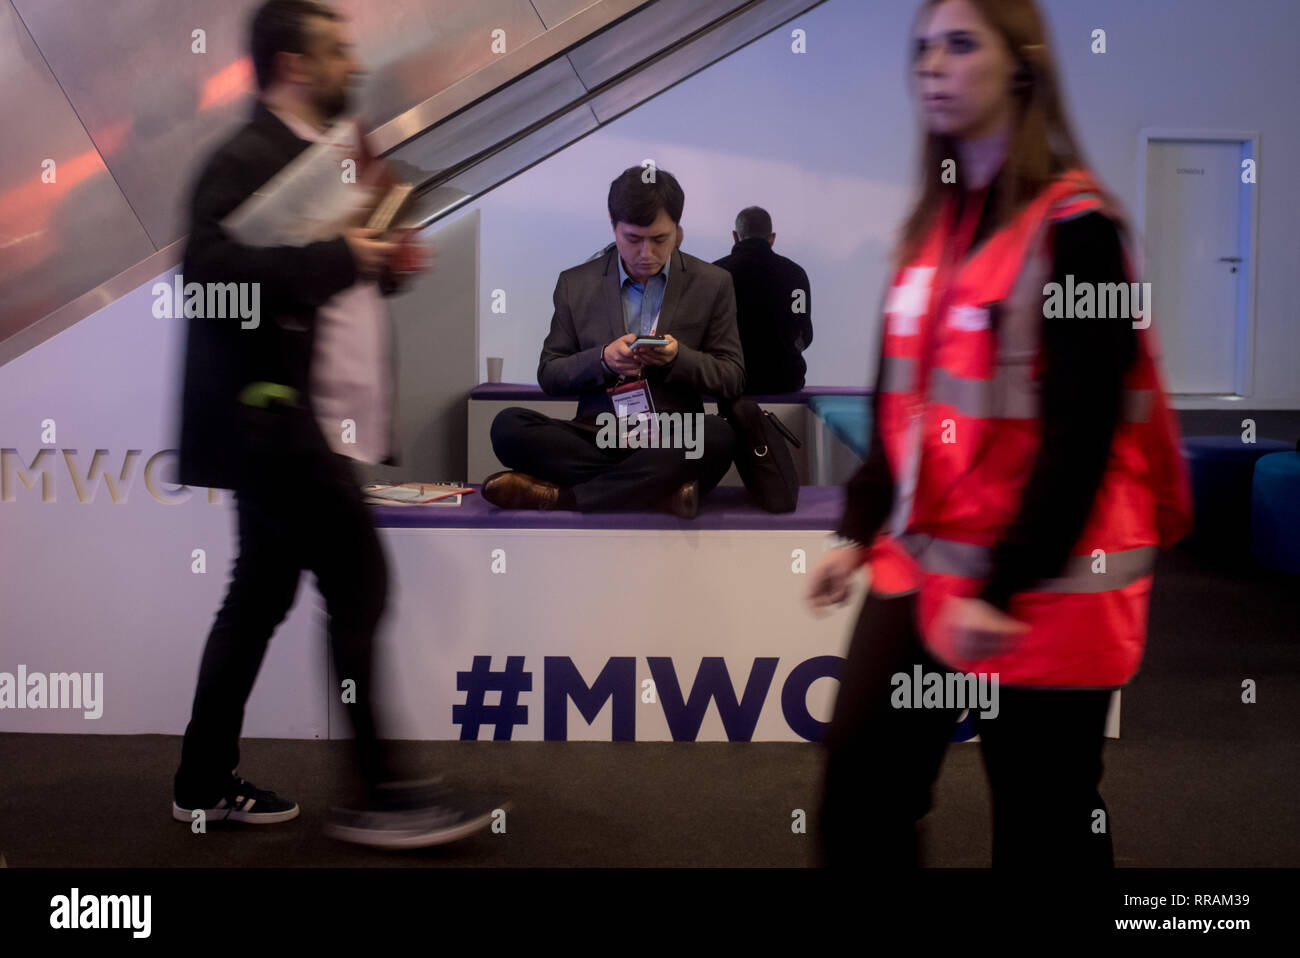 Barcelona, Catalonia, Spain. 25th Feb, 2019. An attendant checks his mobile phone during the opening day of the GSMA Mobile World Congress 2019 in Barcelona, the world's most important event on communication from mobile devices bringing togeteher the leading companies and the latest developments in the sector. Credit: Jordi Boixareu/ZUMA Wire/Alamy Live News Stock Photo